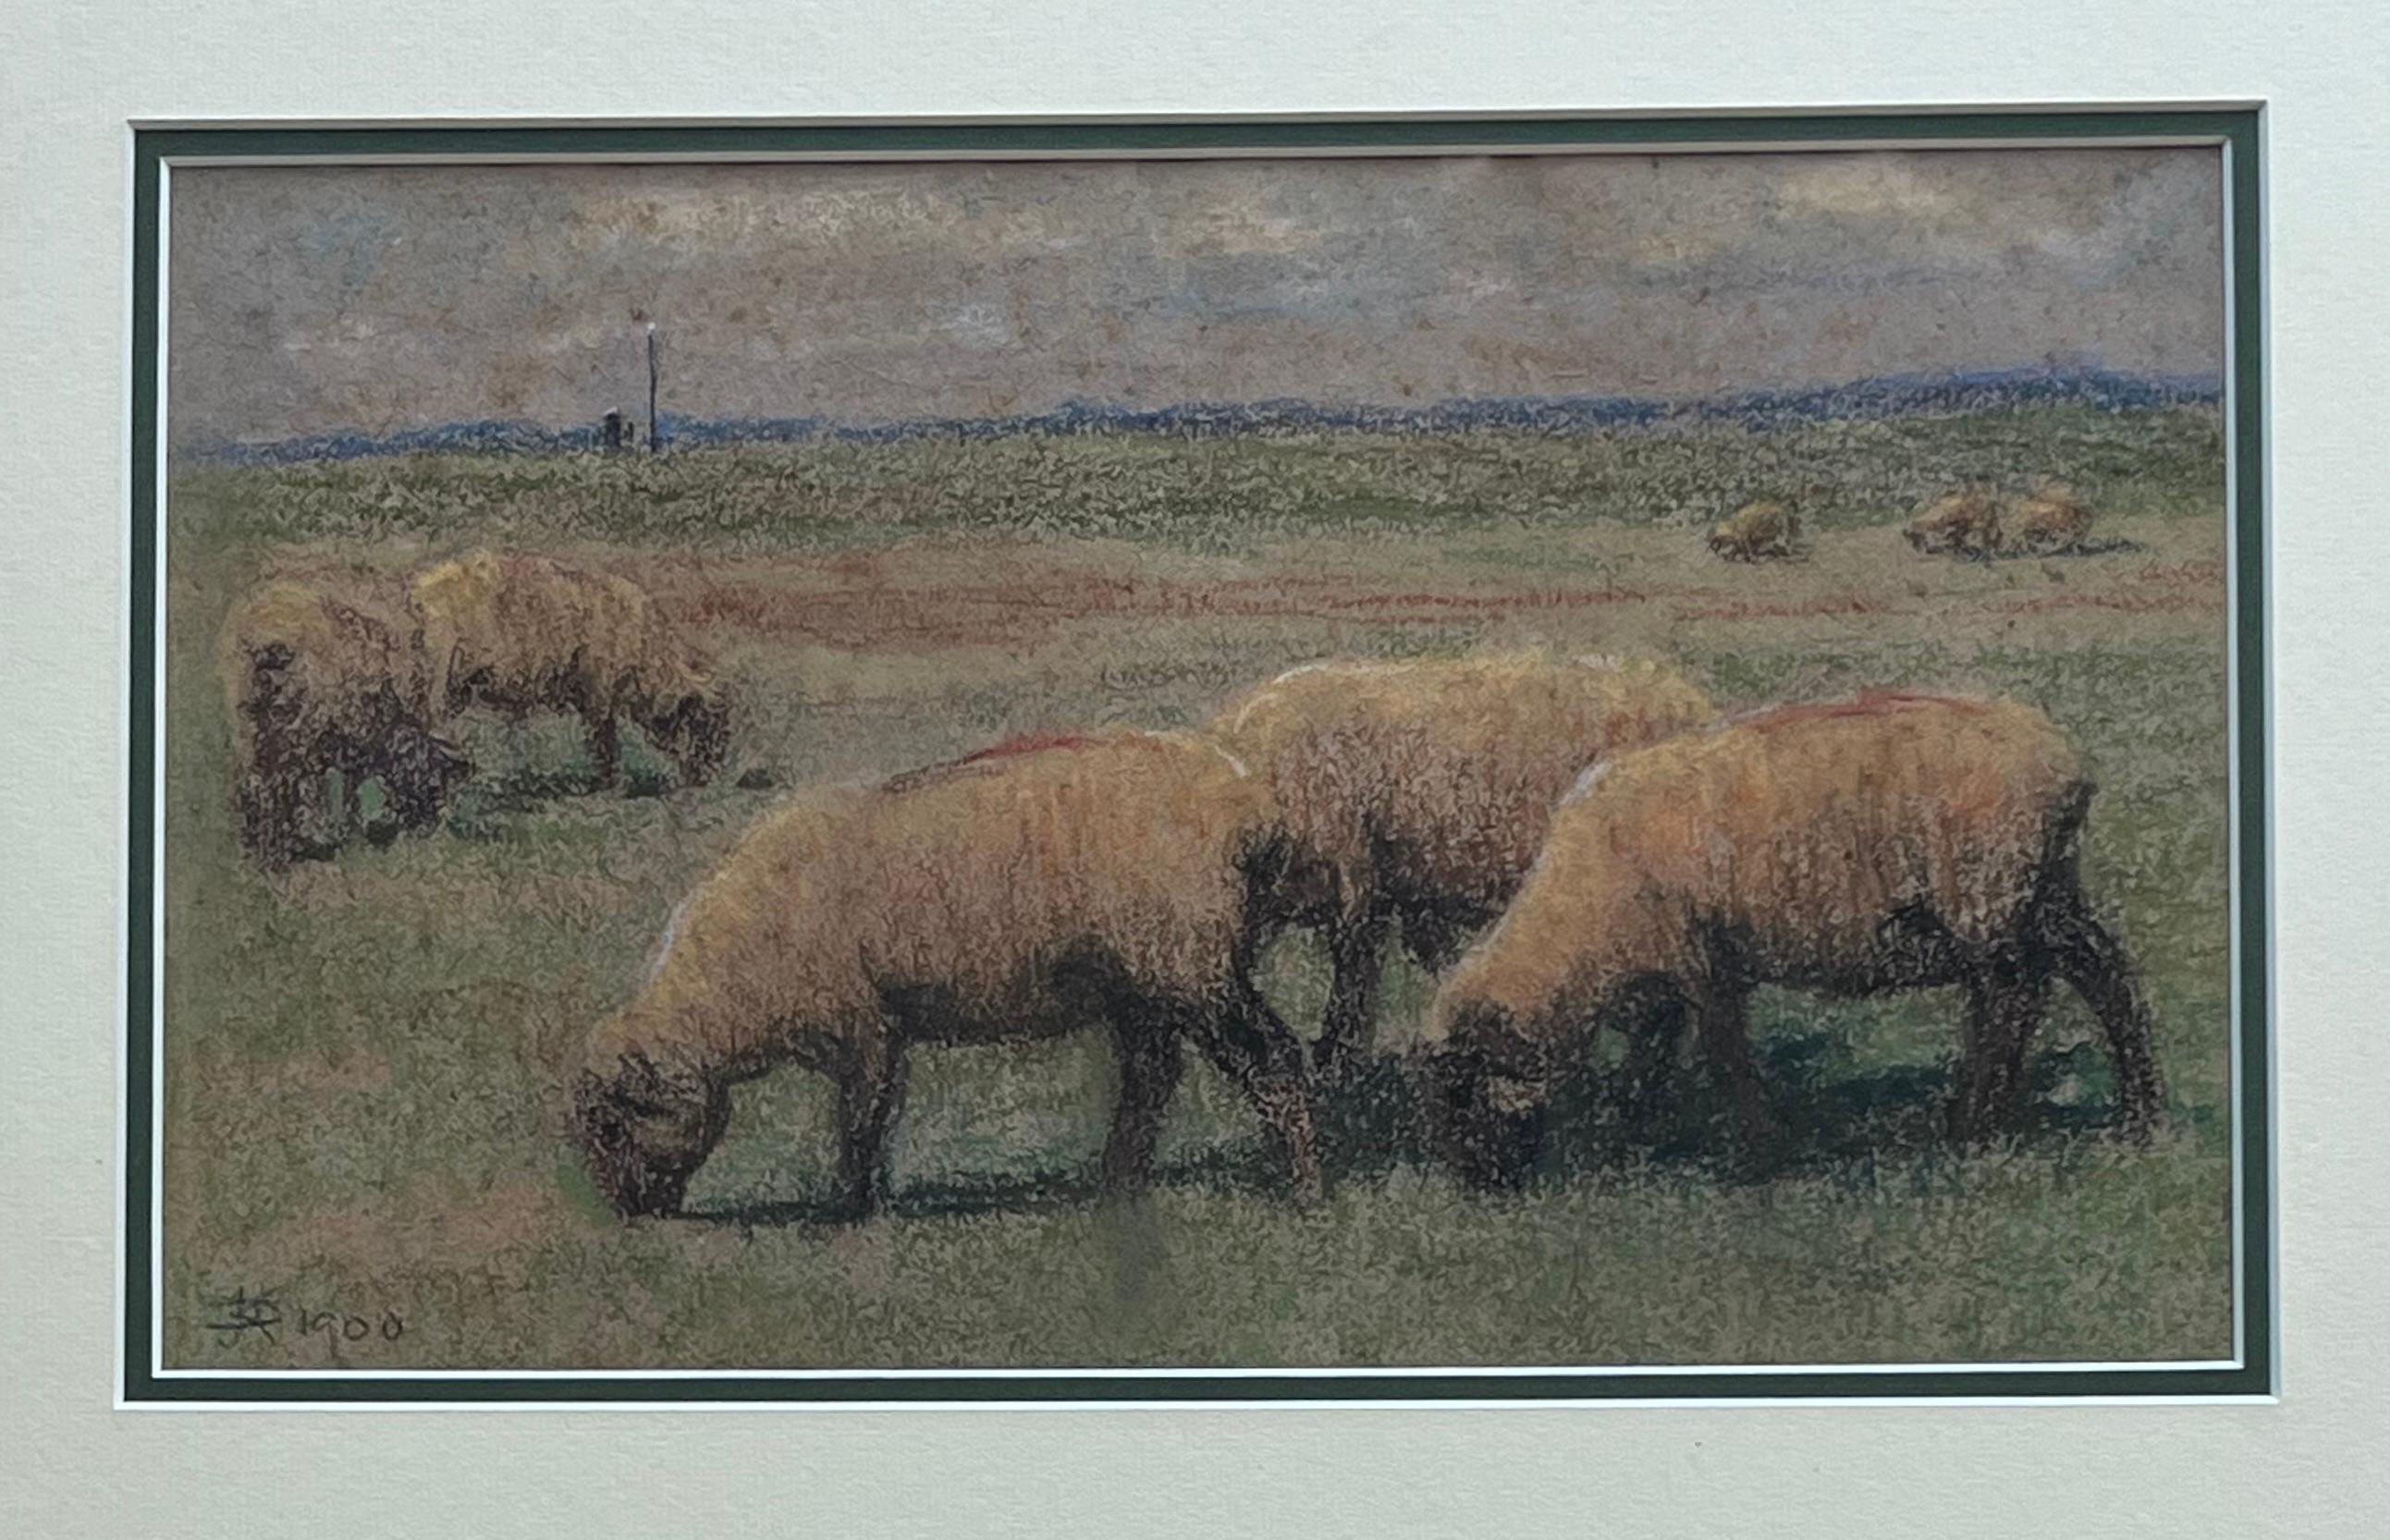 Impressionist scene of sheep grazing in an open pasture